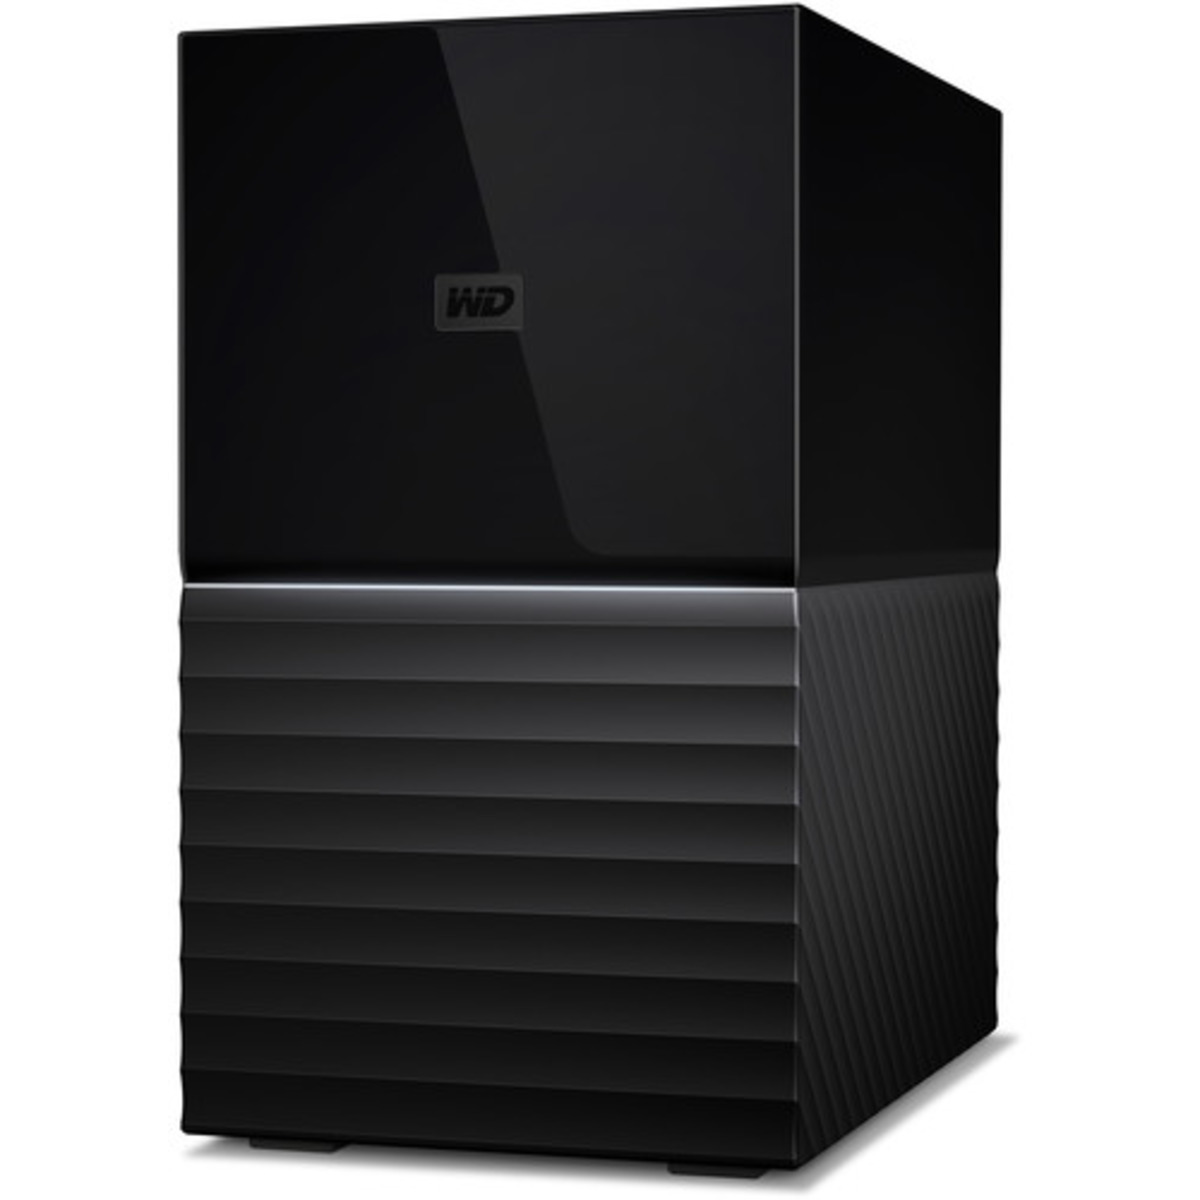 buy $767 Western Digital My Book DUO Gen 2 16tb Desktop DAS - Direct Attached Storage Device 2x8000gb Western Digital Ultrastar DC HC320 HUS728T8TALE6L4 3.5 7200rpm SATA 6Gb/s HDD ENTERPRISE Class Drives Installed - Burn-In Tested - ON SALE - nas headquarters buy network attached storage server device das new raid-5 free shipping usa christmas new year holiday sale My Book DUO Gen 2